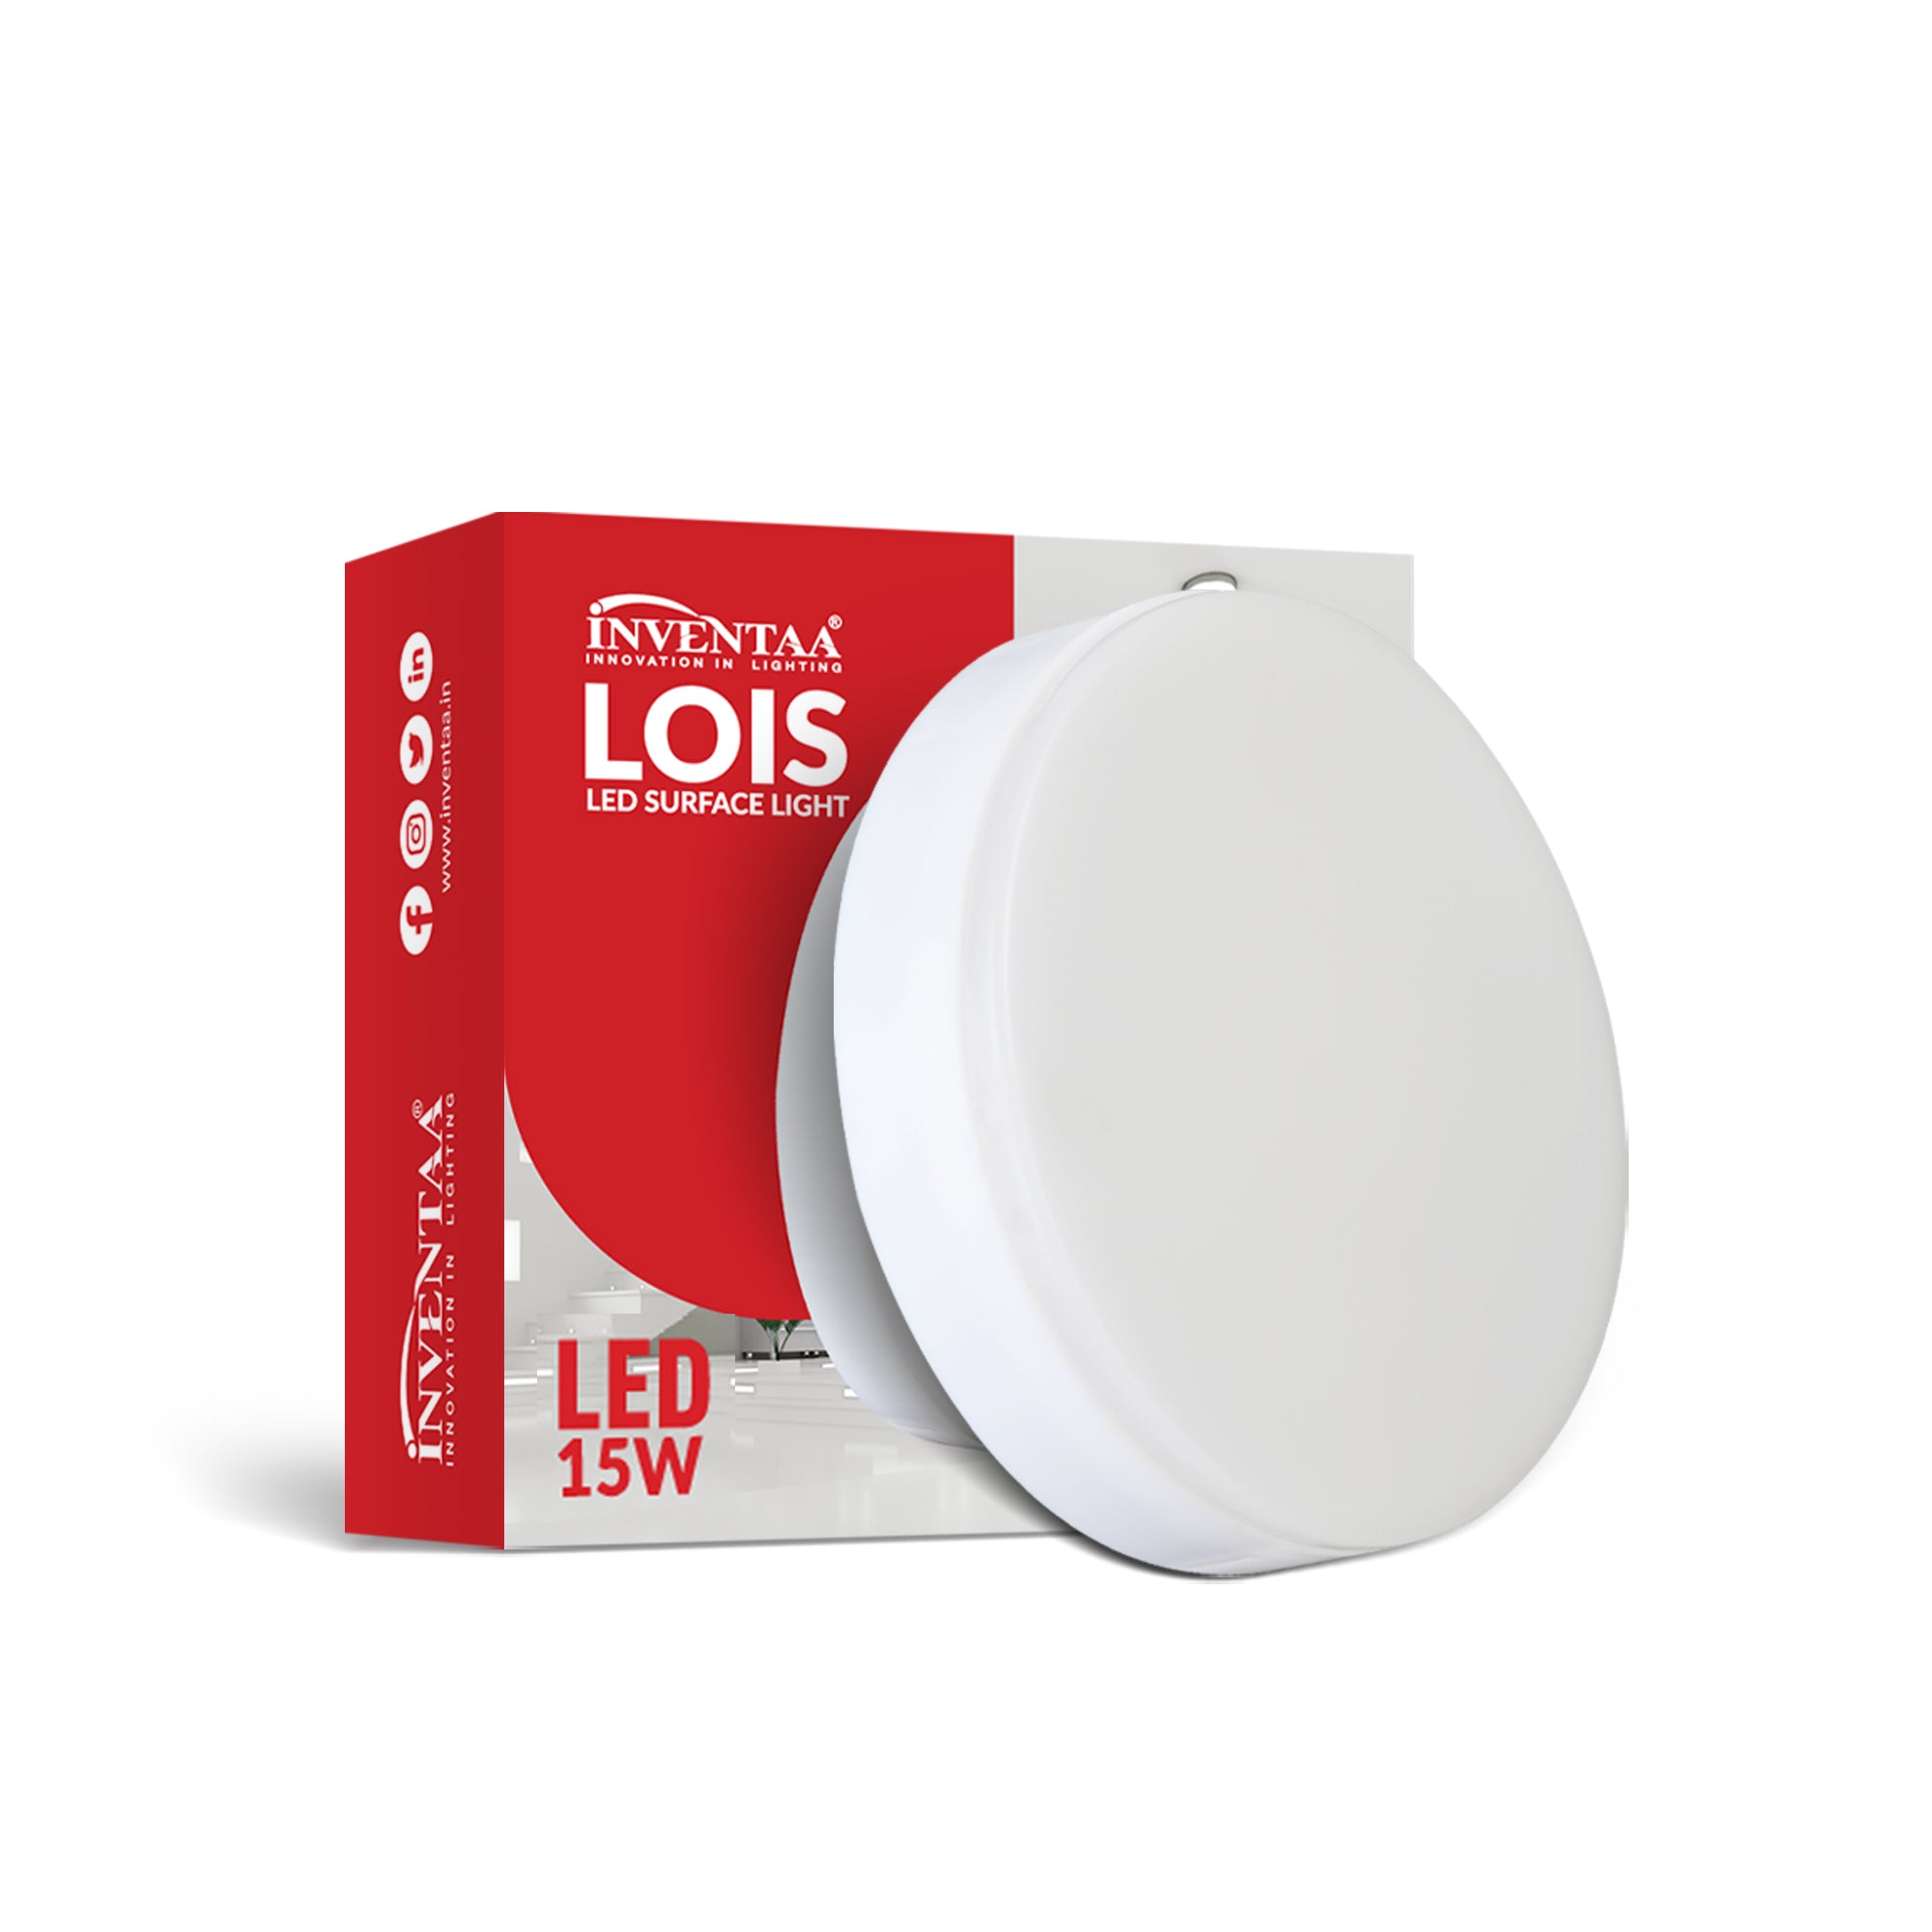 Lois Round 15W LED Surface Light With Its Box Enclosure #watts_15w